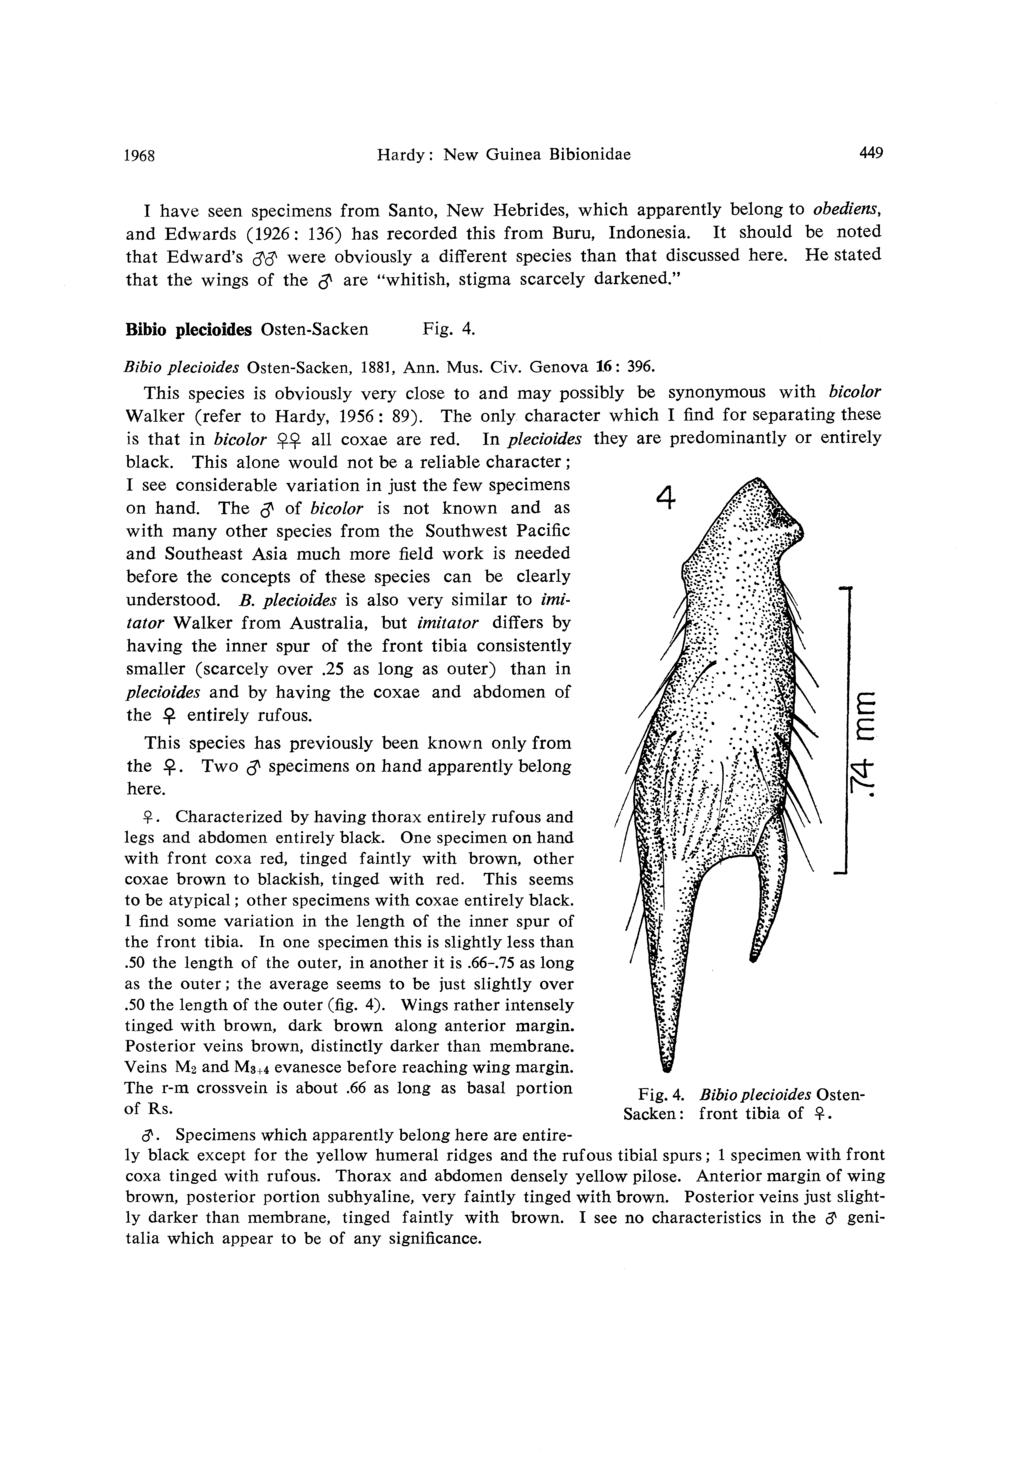 1968 Hardy: New Guinea Bibionidae 449 I have seen specimens from Santo, New Hebrides, which apparently belong to obediens, and Edwards (1926: 136) has recorded this from Buru, Indonesia.